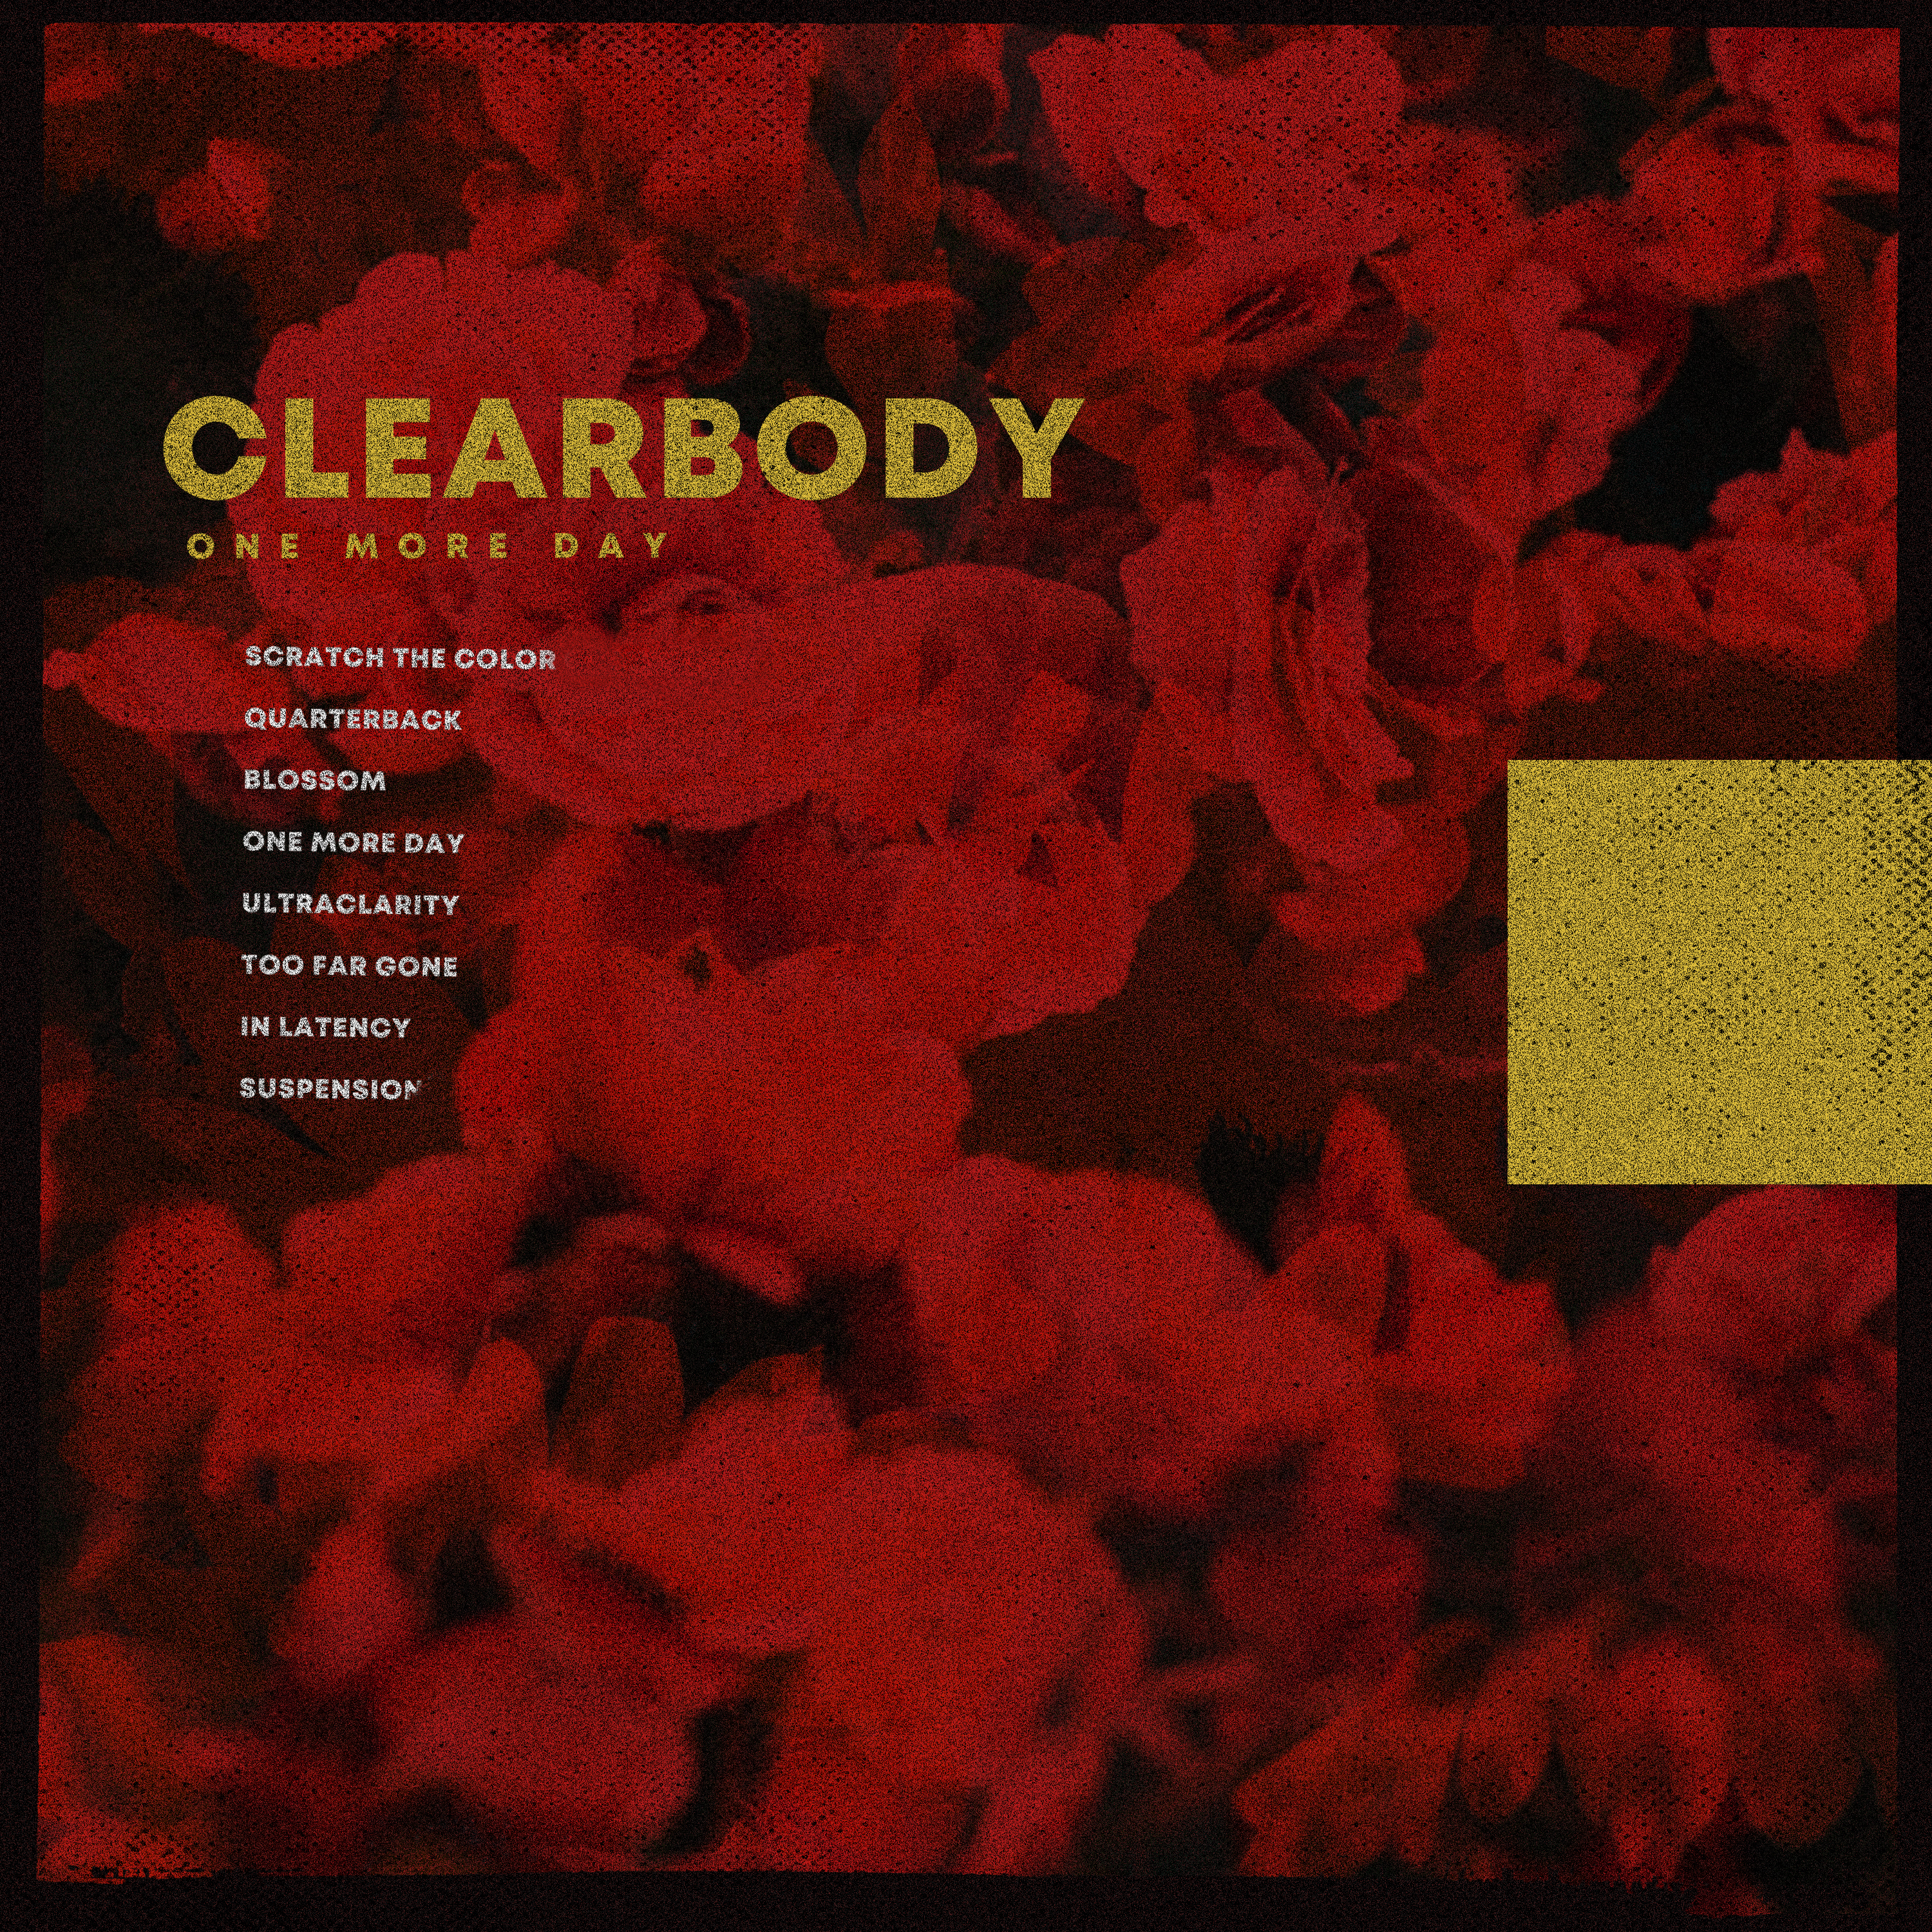 Clearbody Up Their Game With <i>One More Day</i>